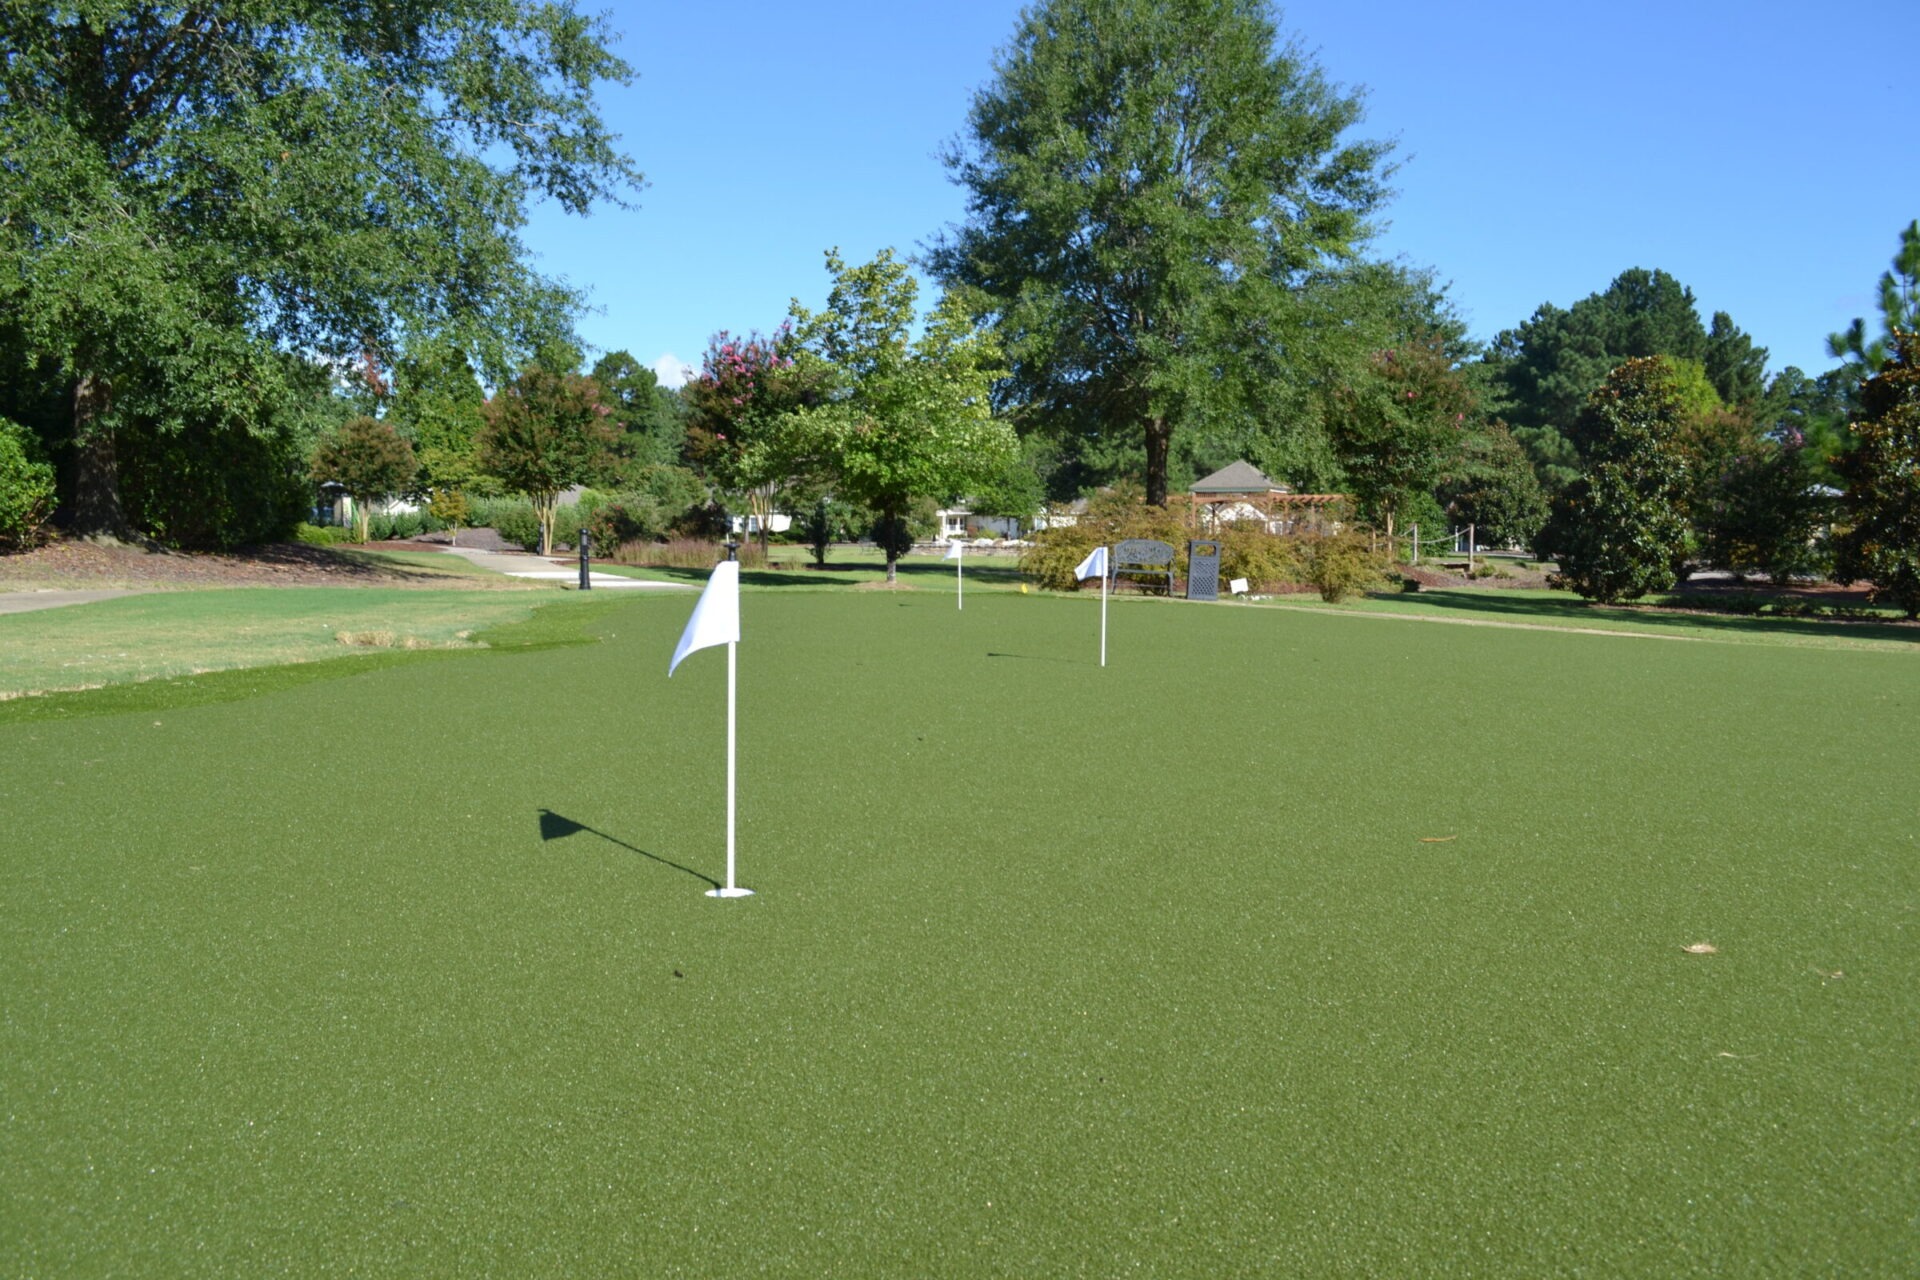 A golf green with multiple holes and flags, surrounded by trees under a clear blue sky. There is no one in the image.